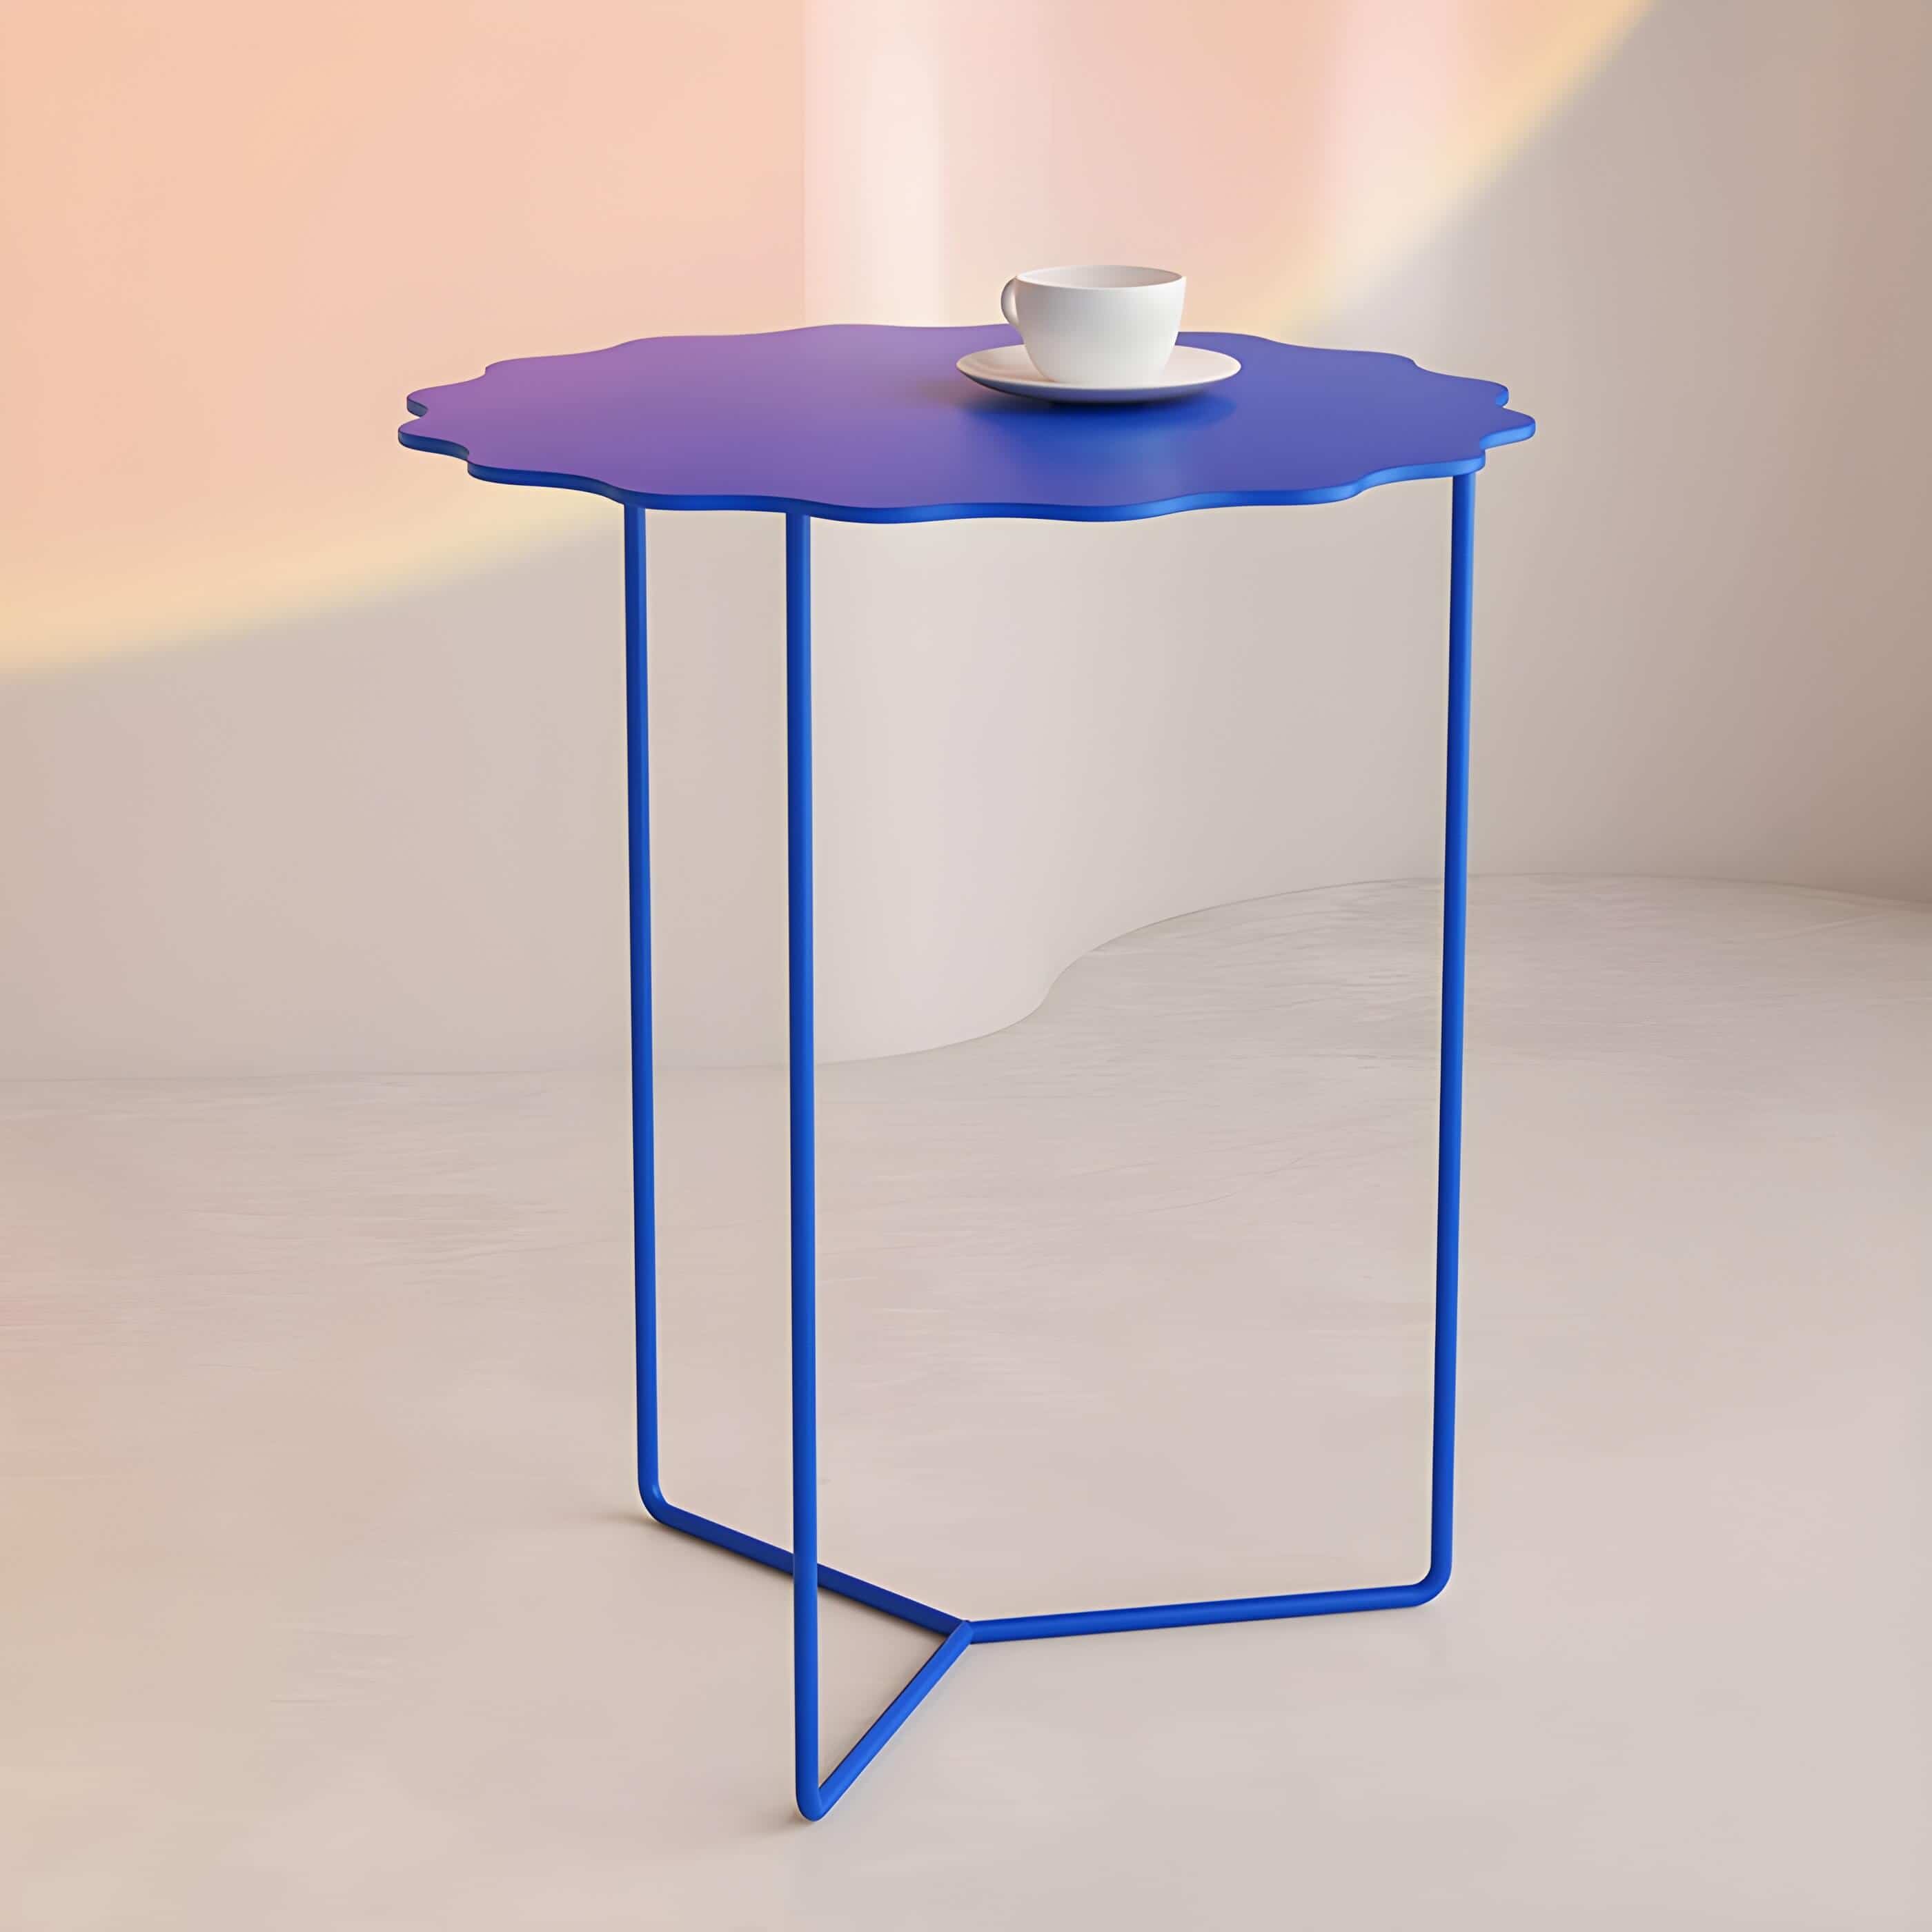 Judder metal round side table with squiggle sides